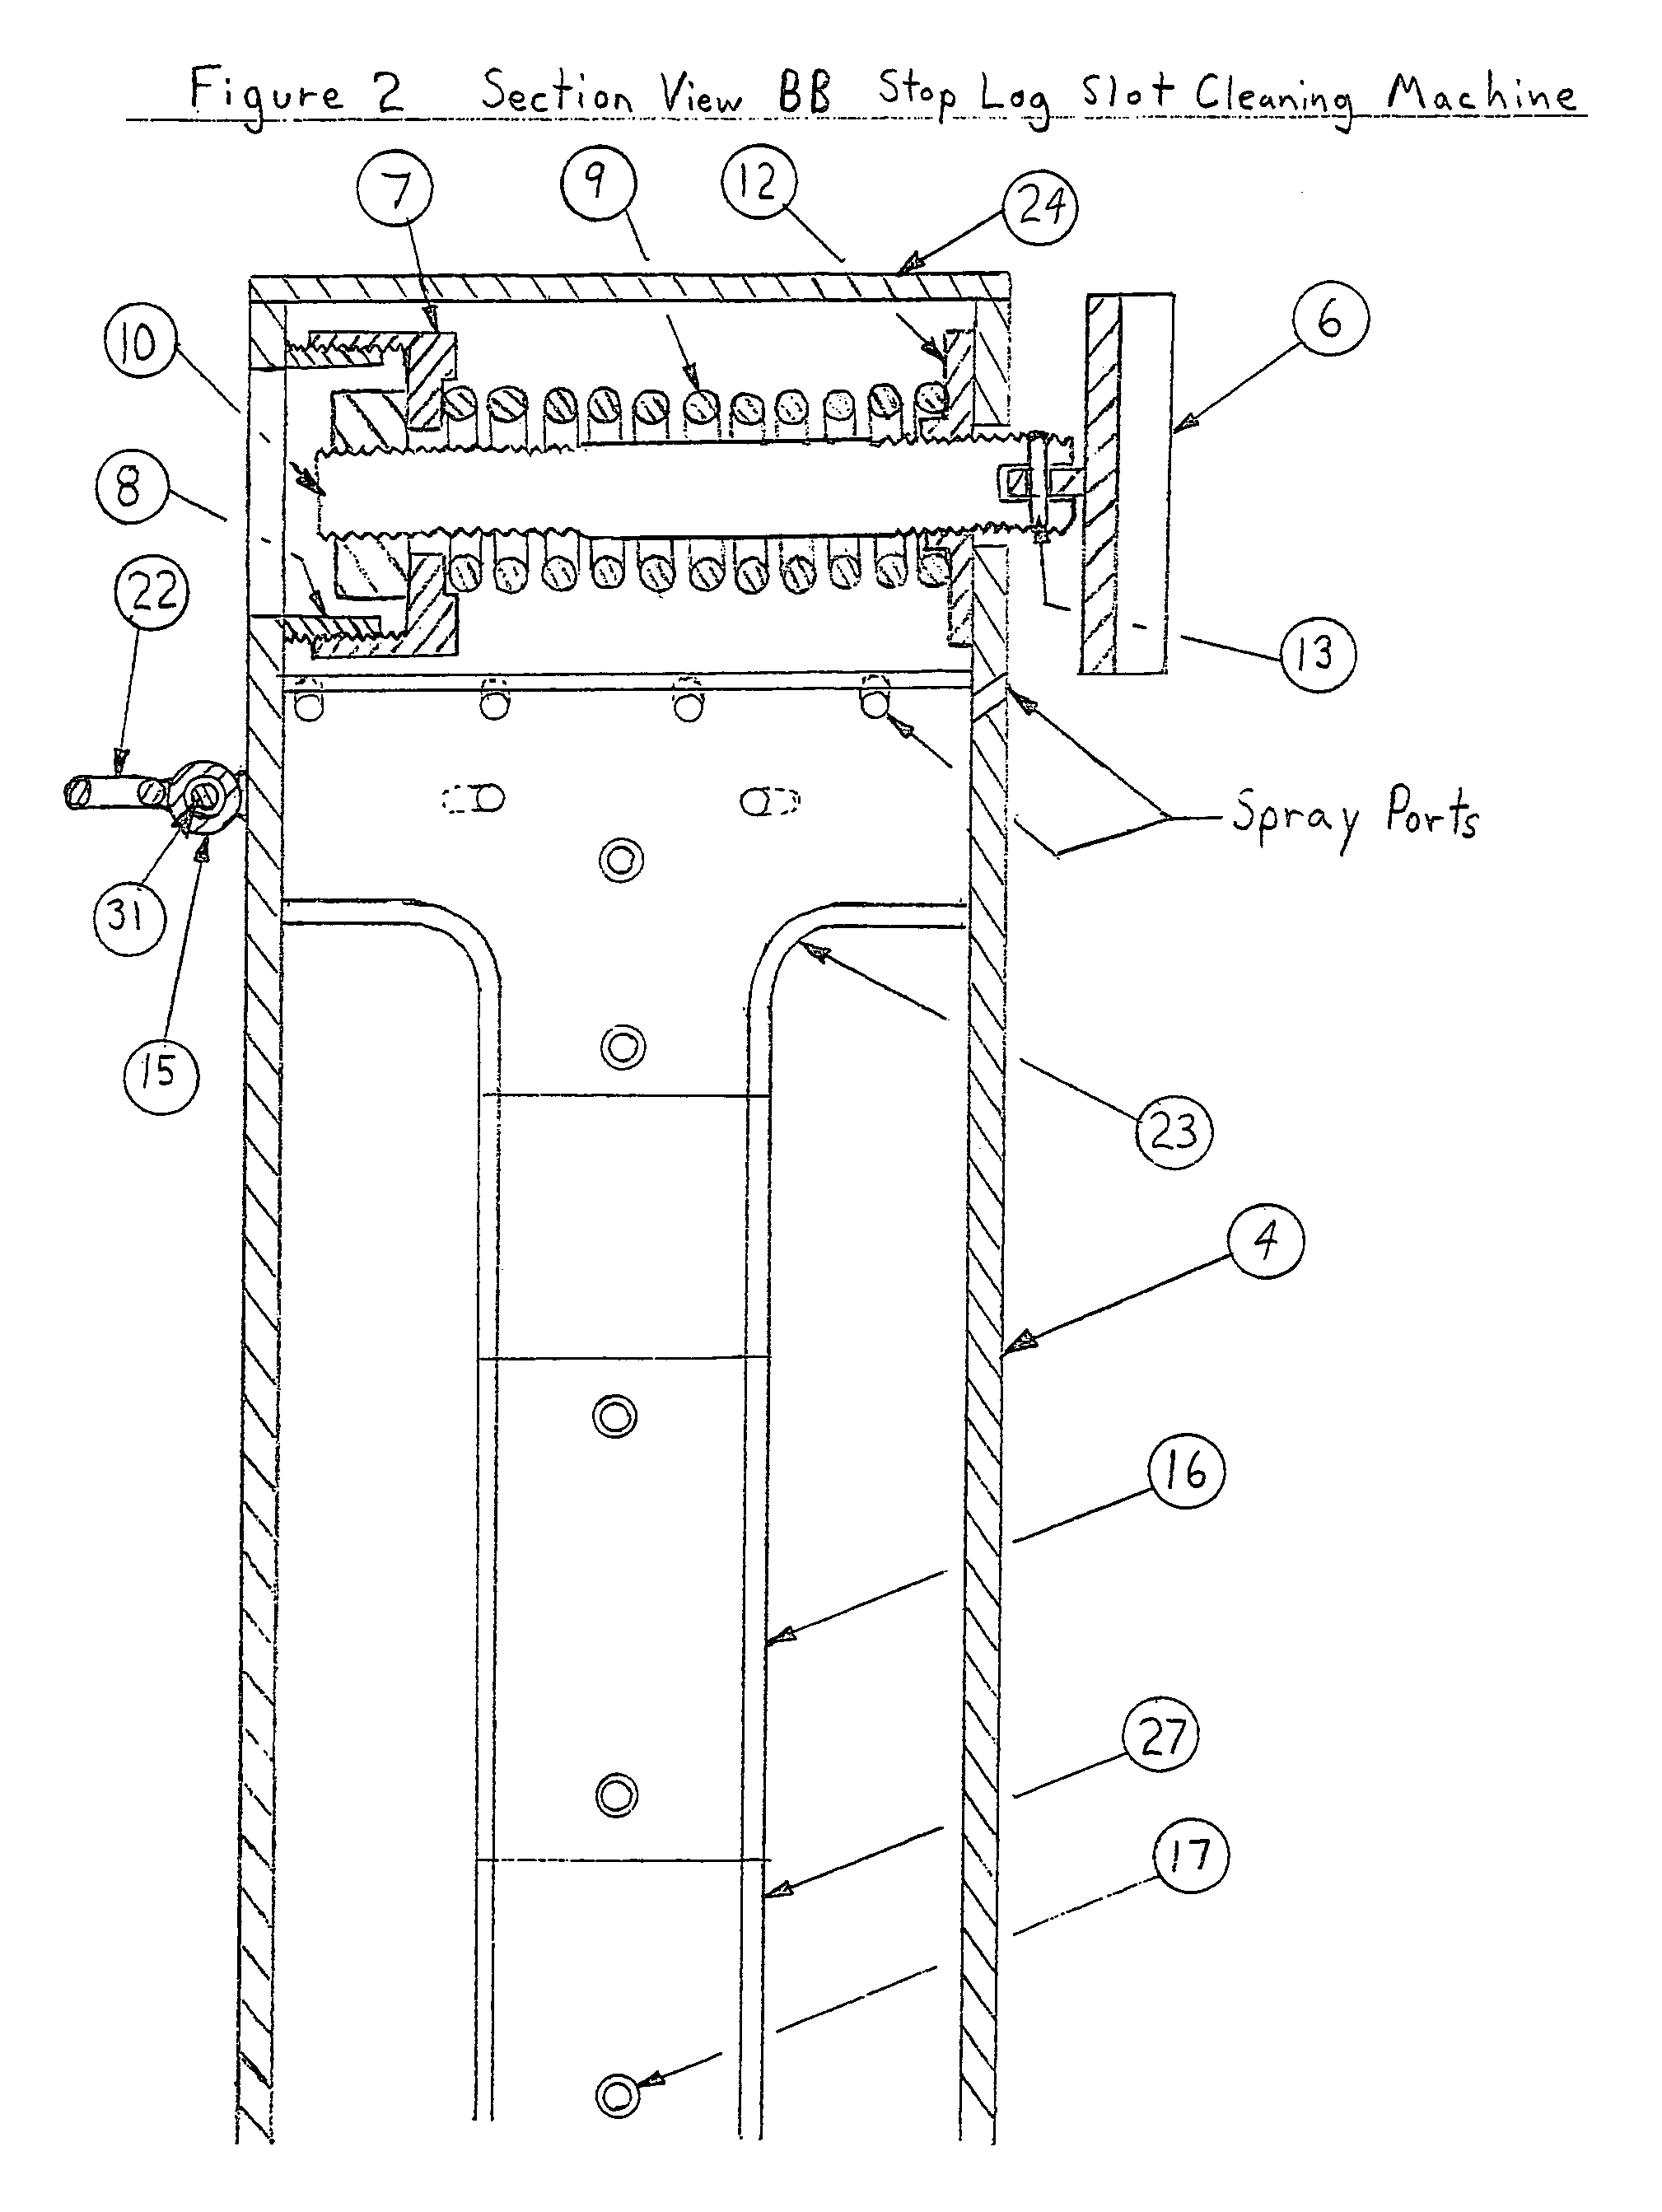 Method and apparatus for stop log slot/guide sealing surface cleaning